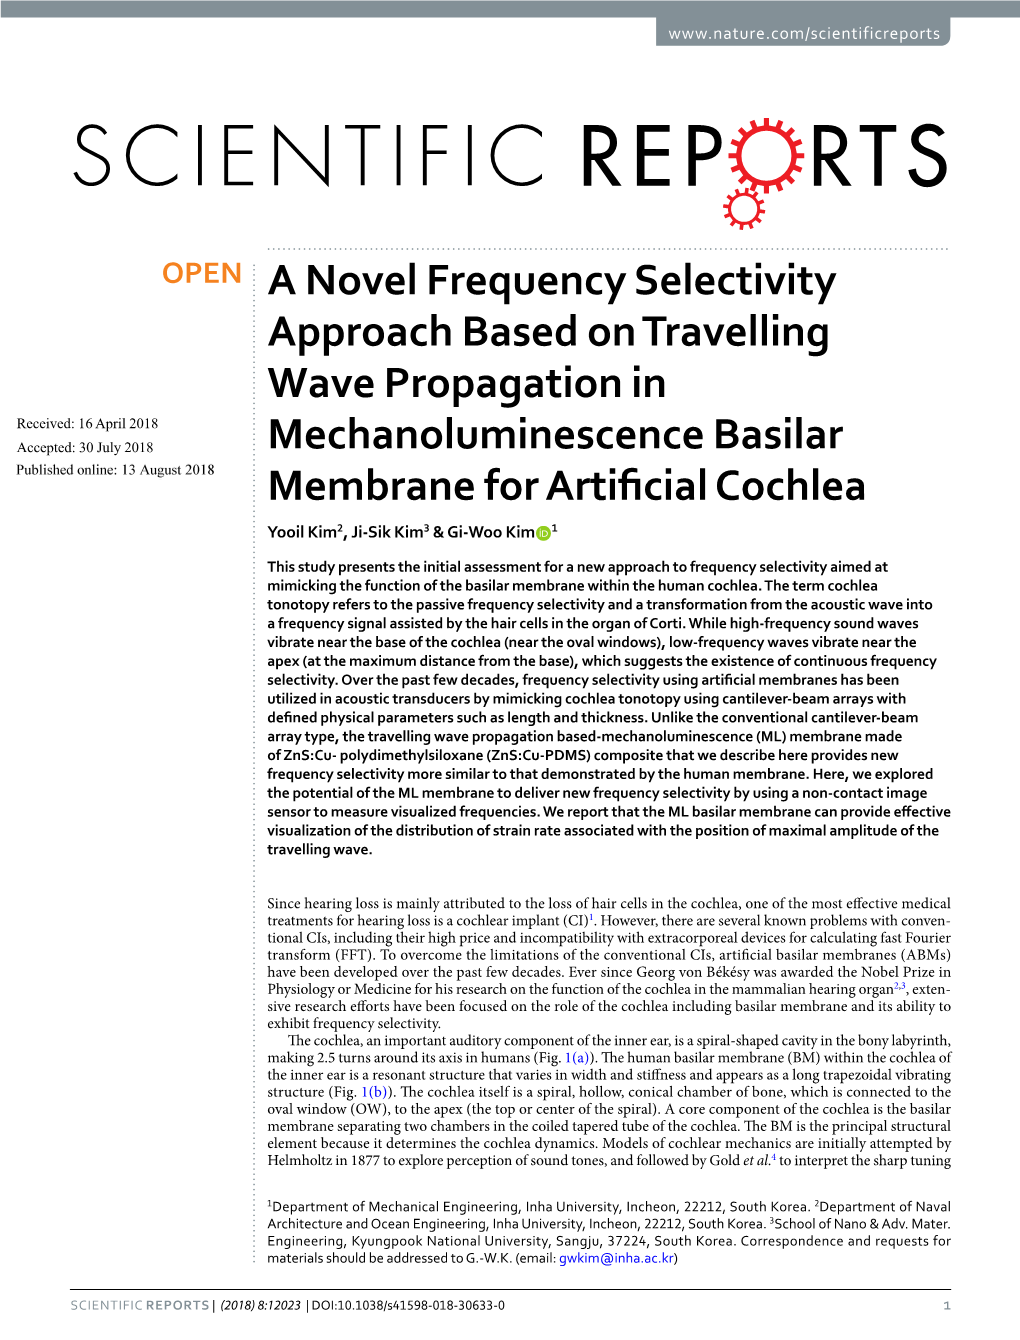 A Novel Frequency Selectivity Approach Based on Travelling